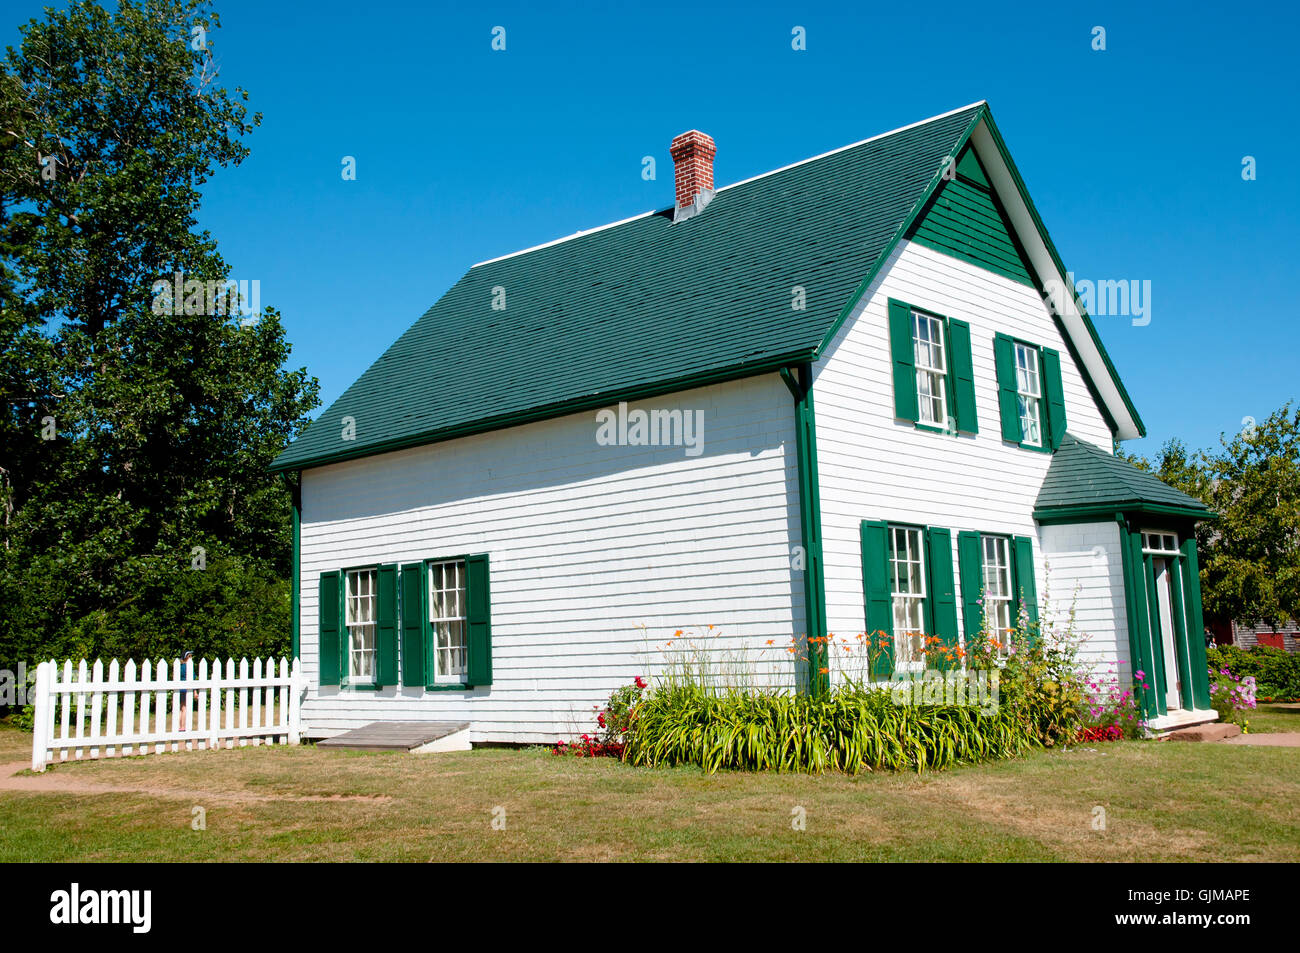 Anne of Green Gables - Prince Edward Island - Canada Banque D'Images